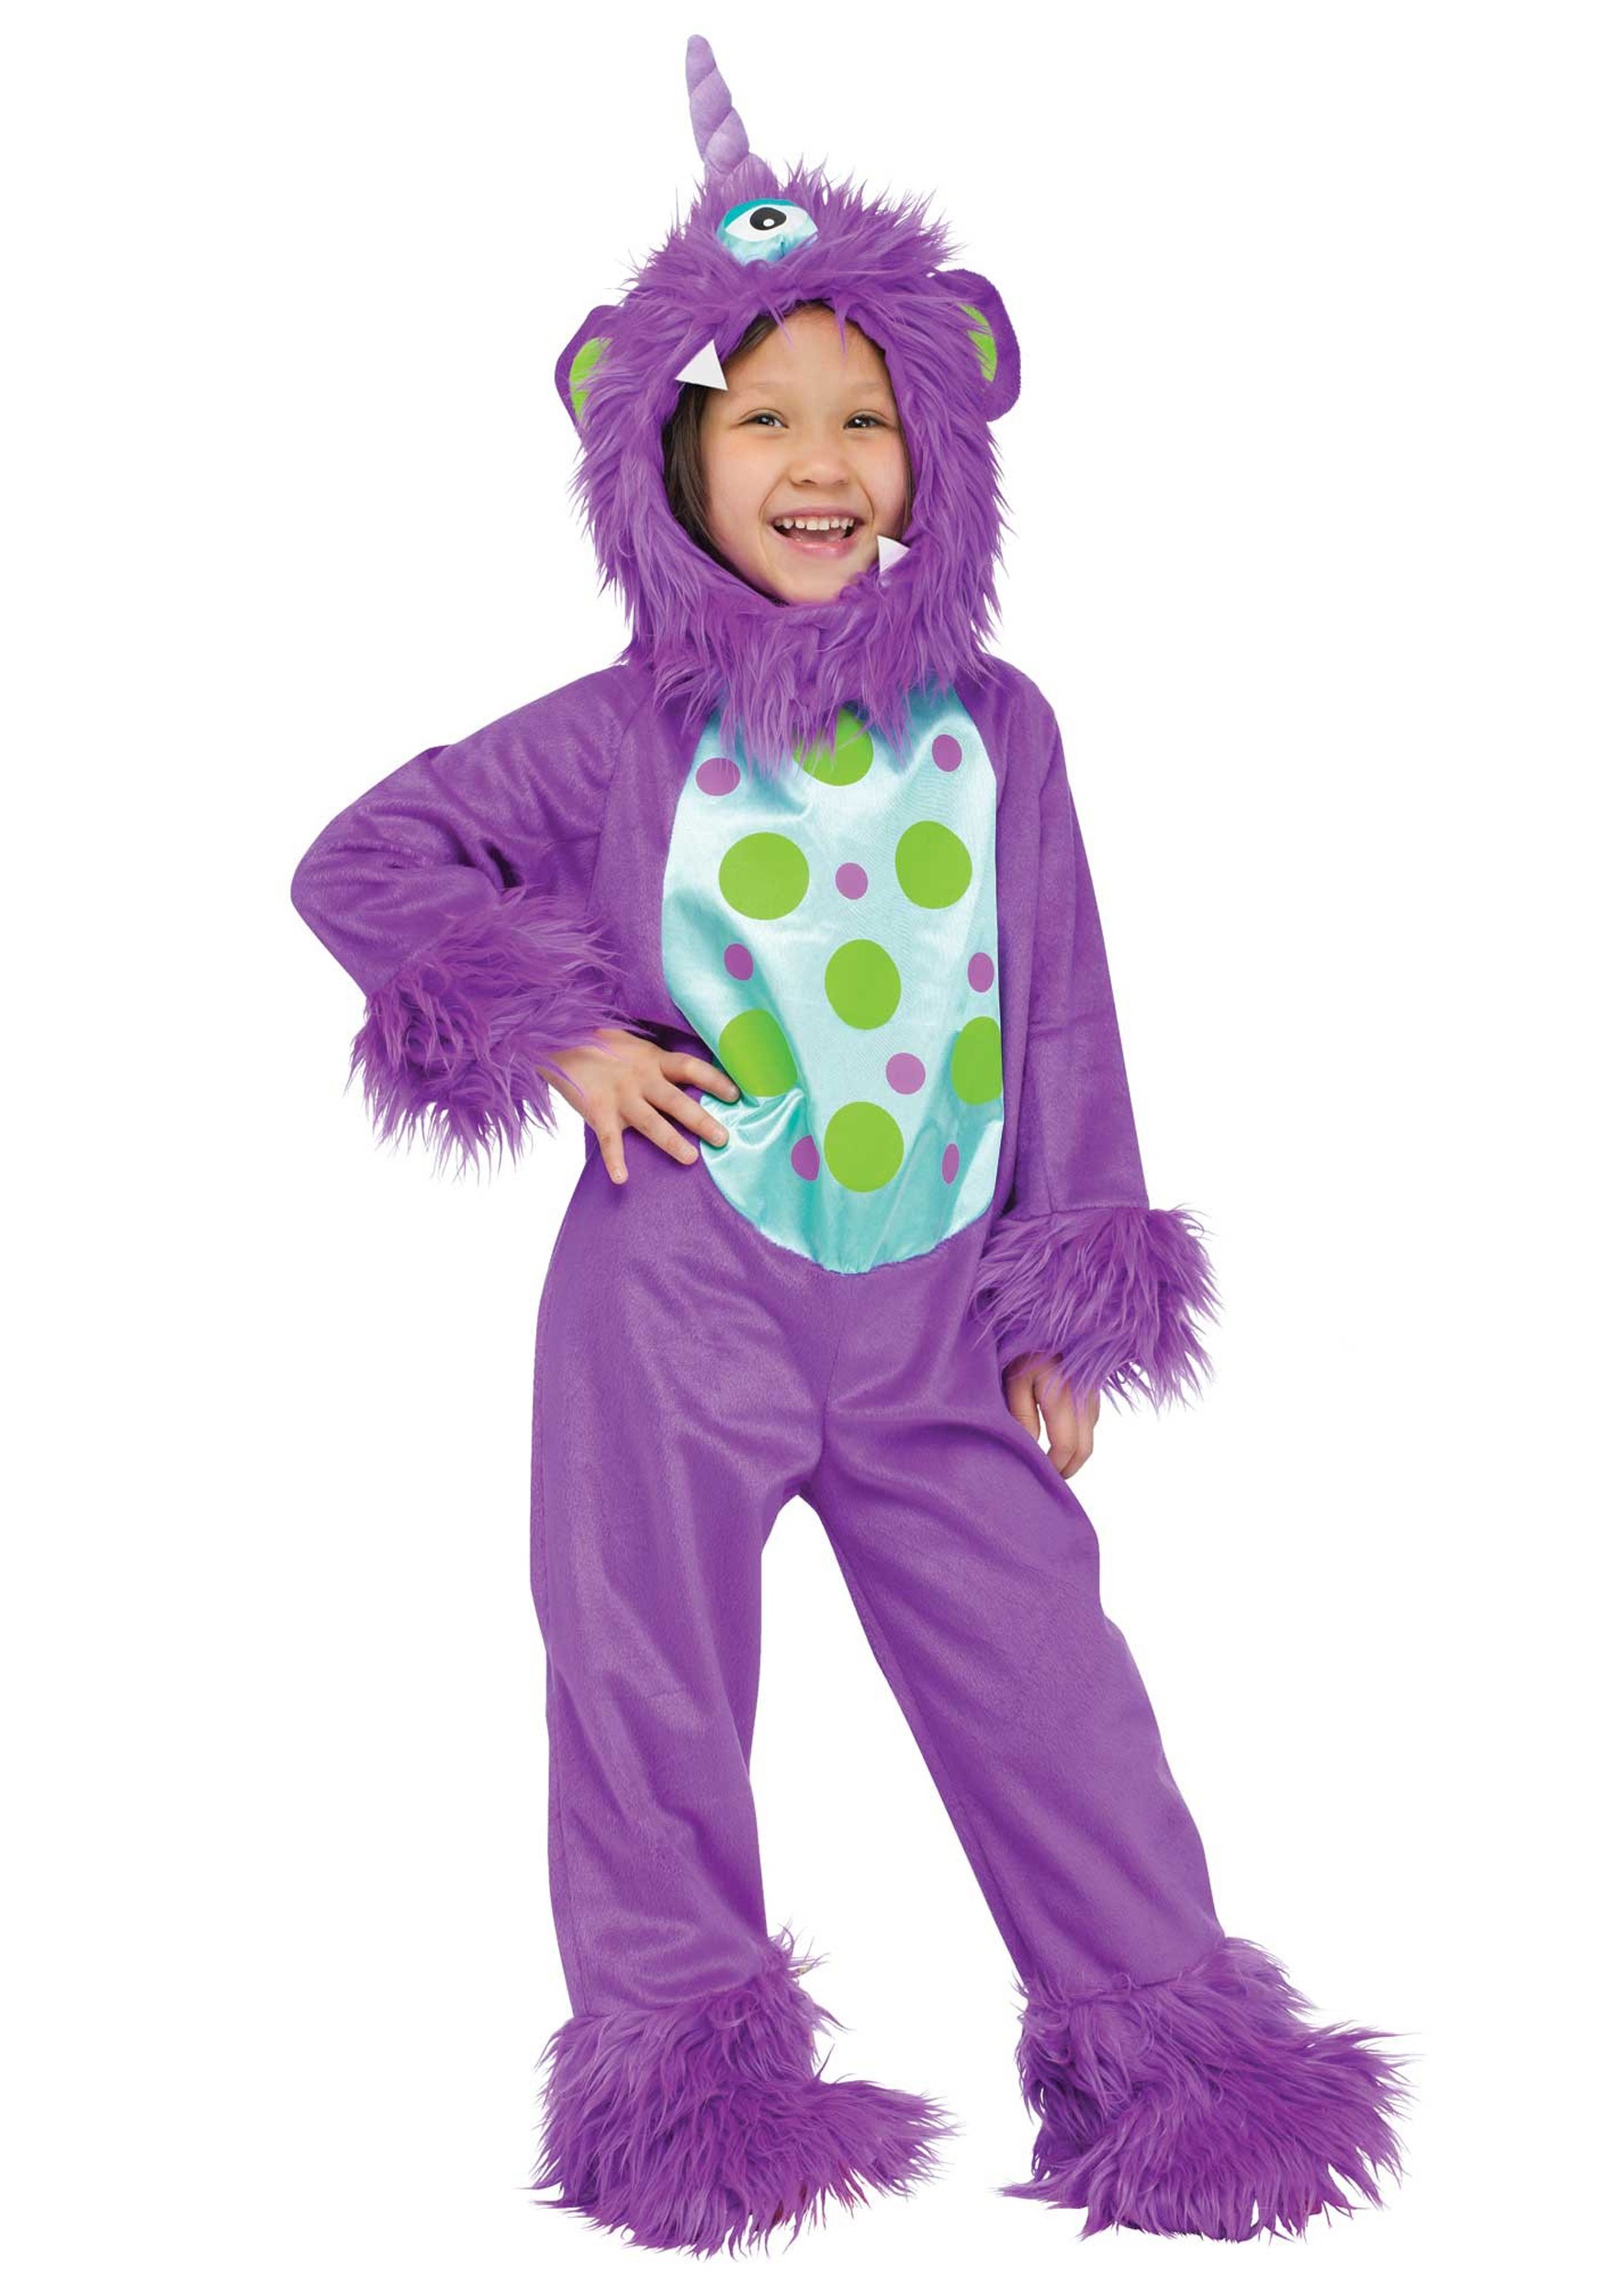 Now your little one can become the one-eyed purple people eater! 